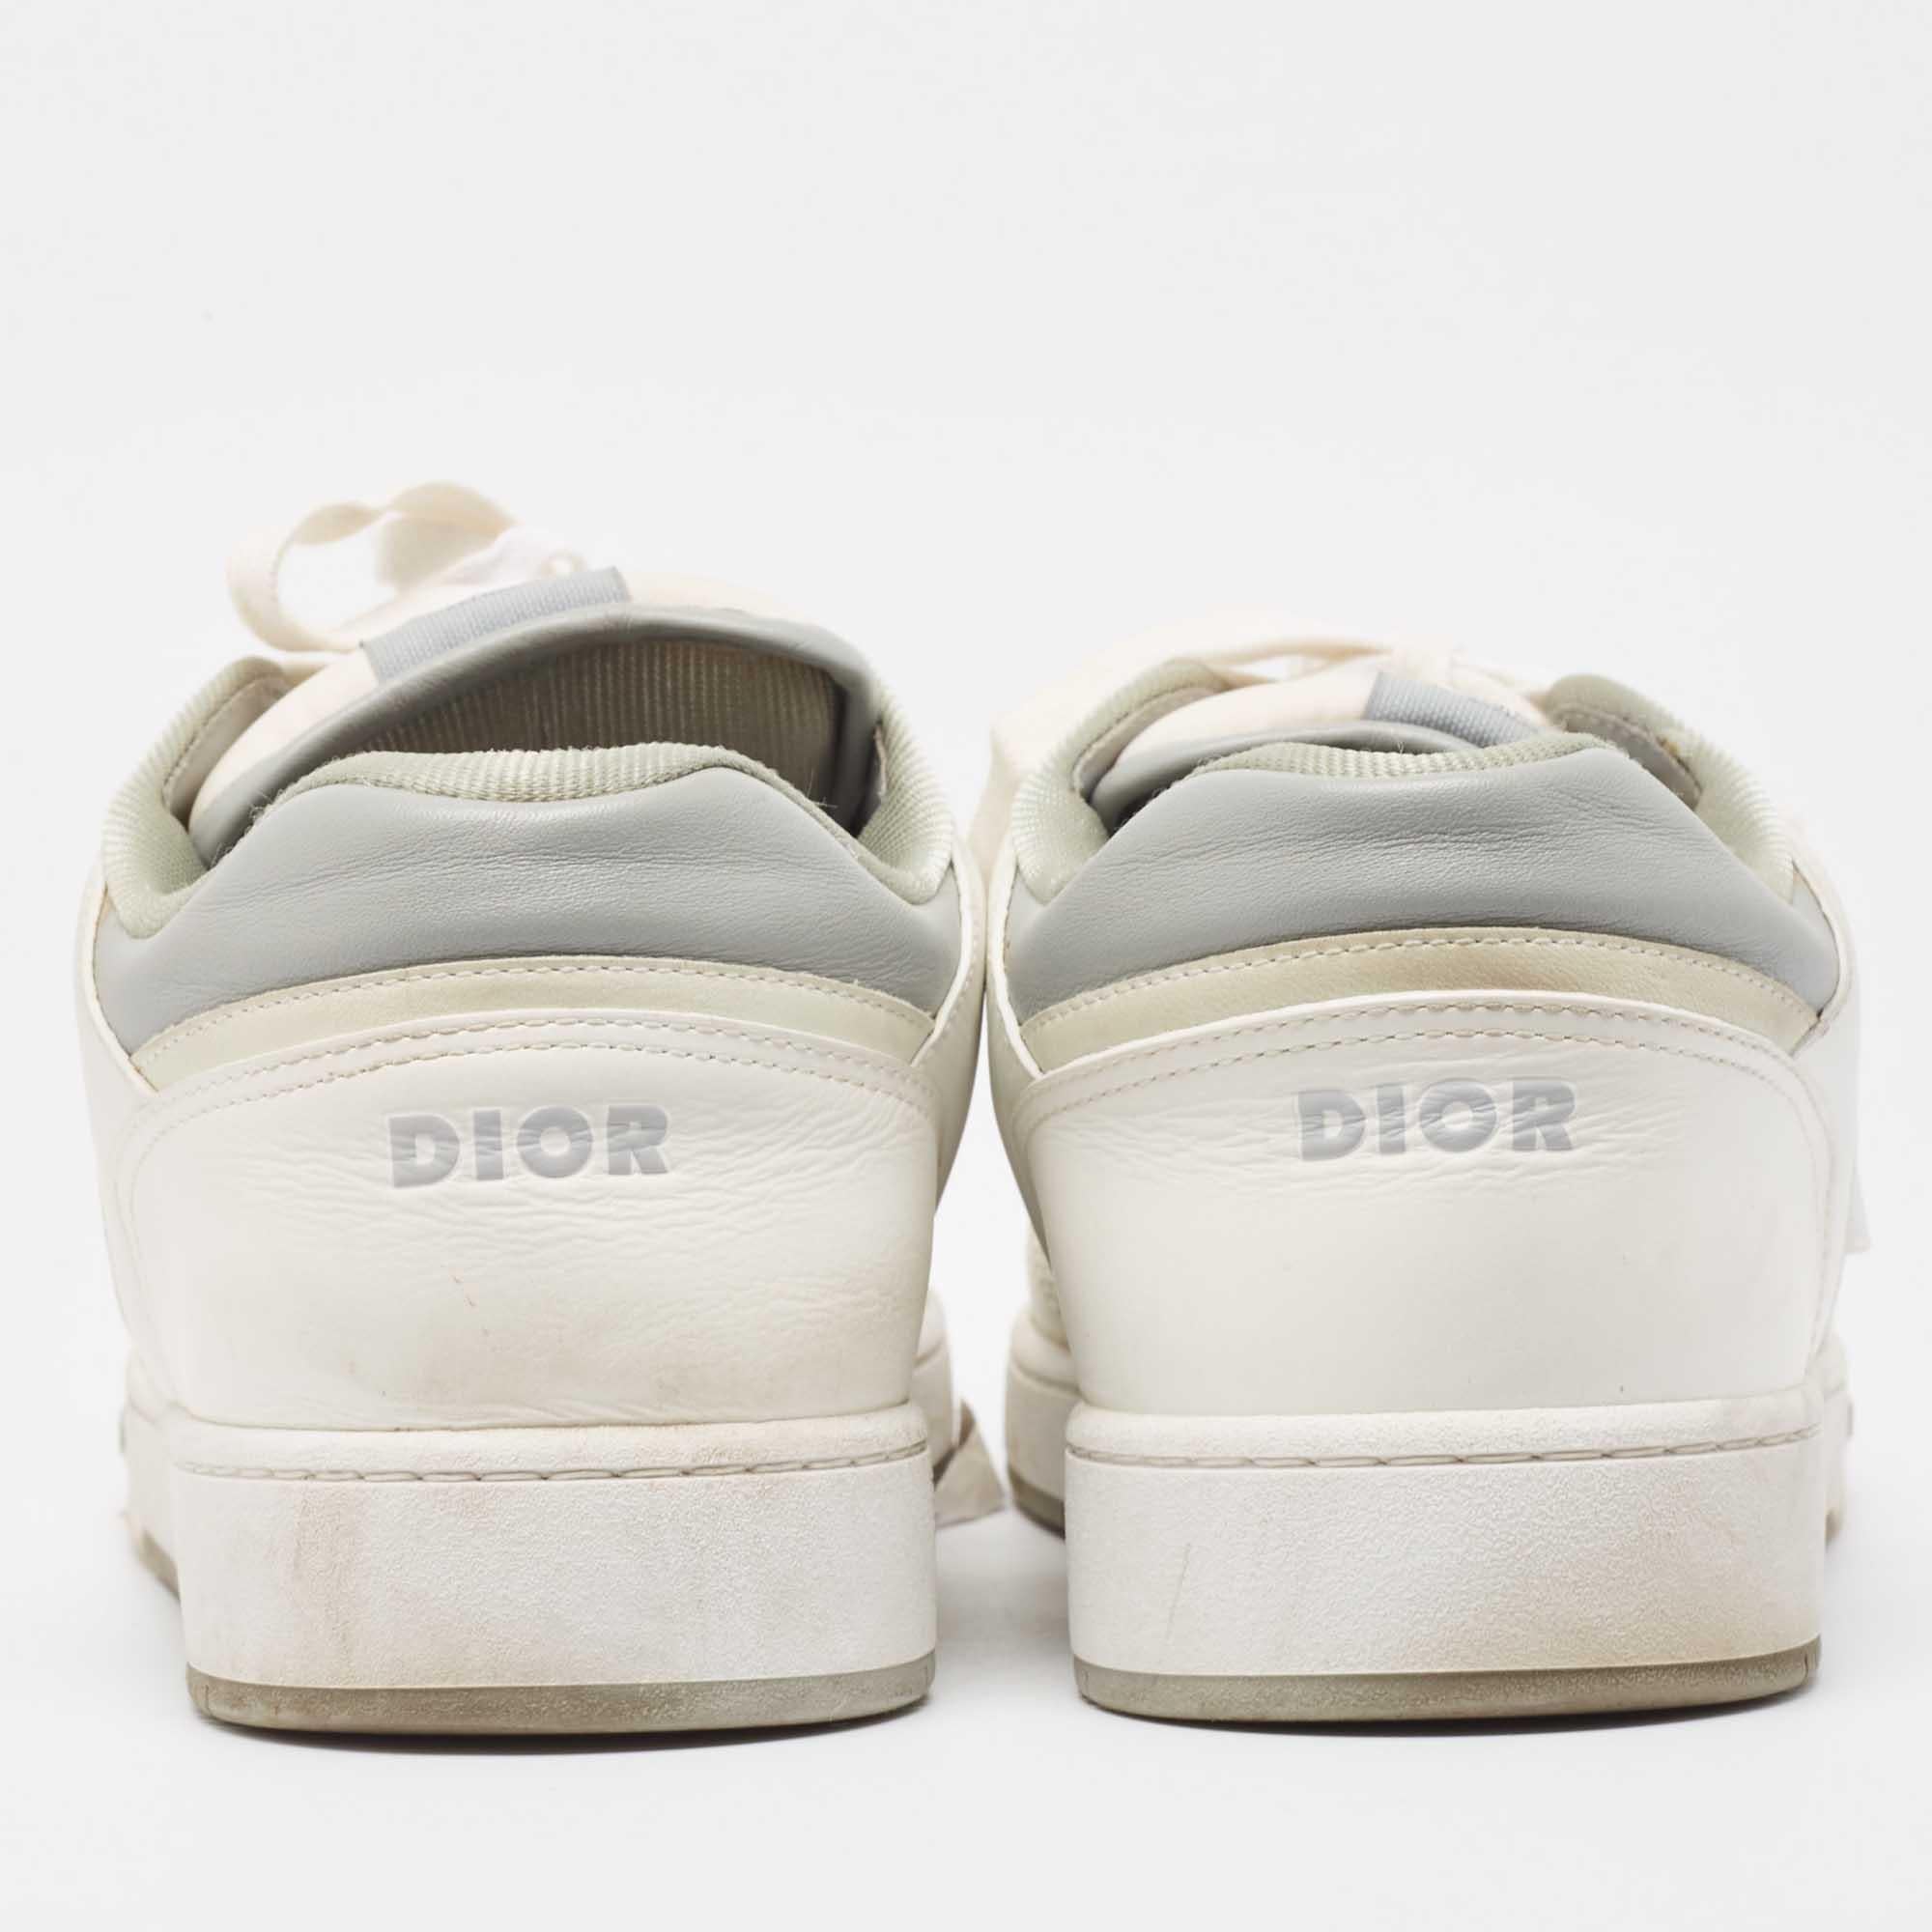 Men's Dior White/Grey Leather B27 Low Top Sneakers Size 46